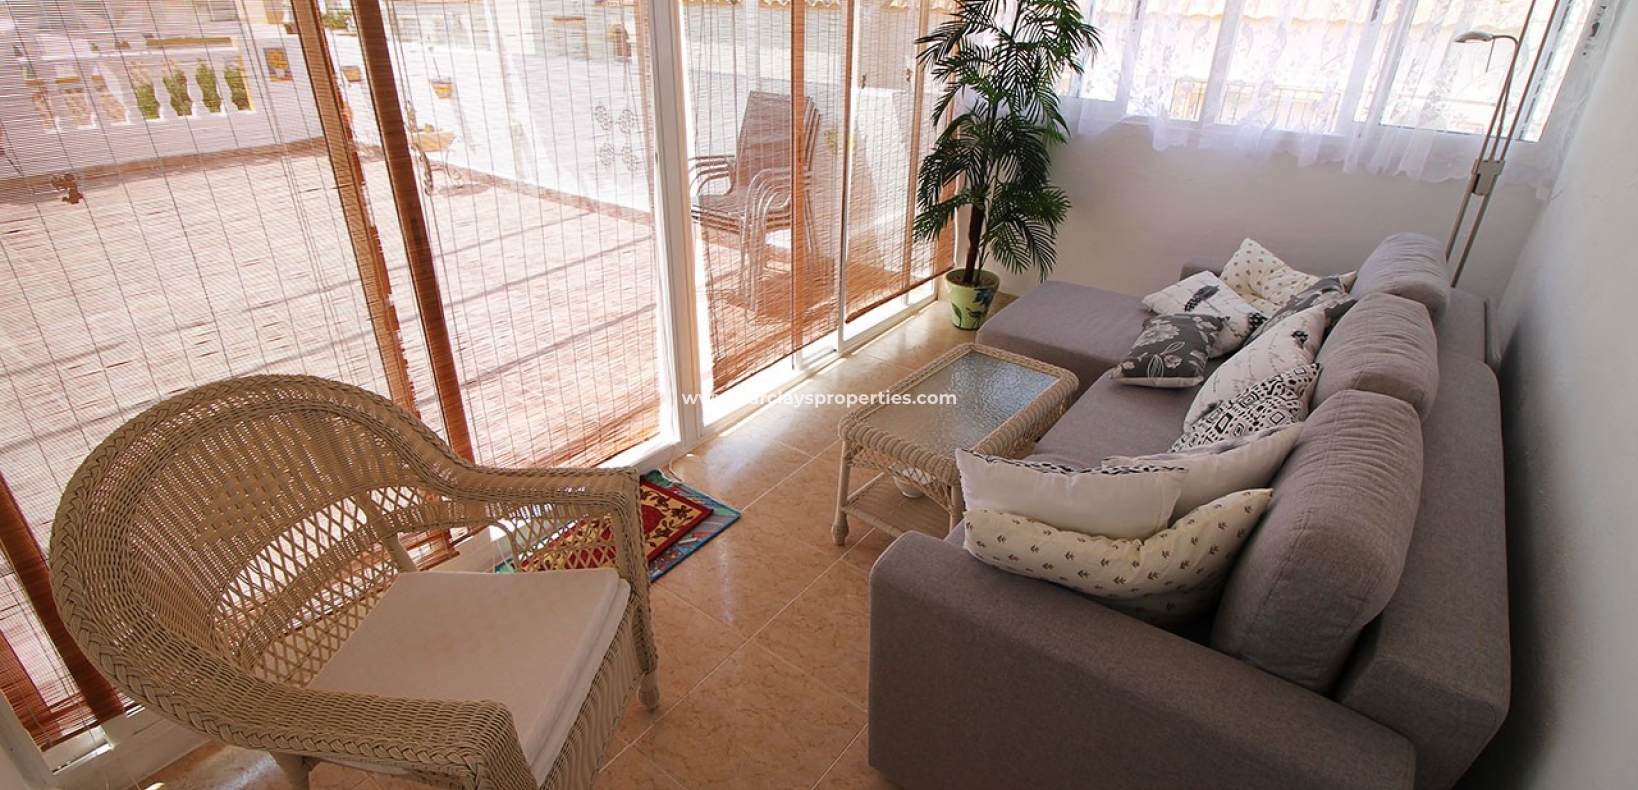 Conservatory - South Facing Property for Sale in La Marina Spain